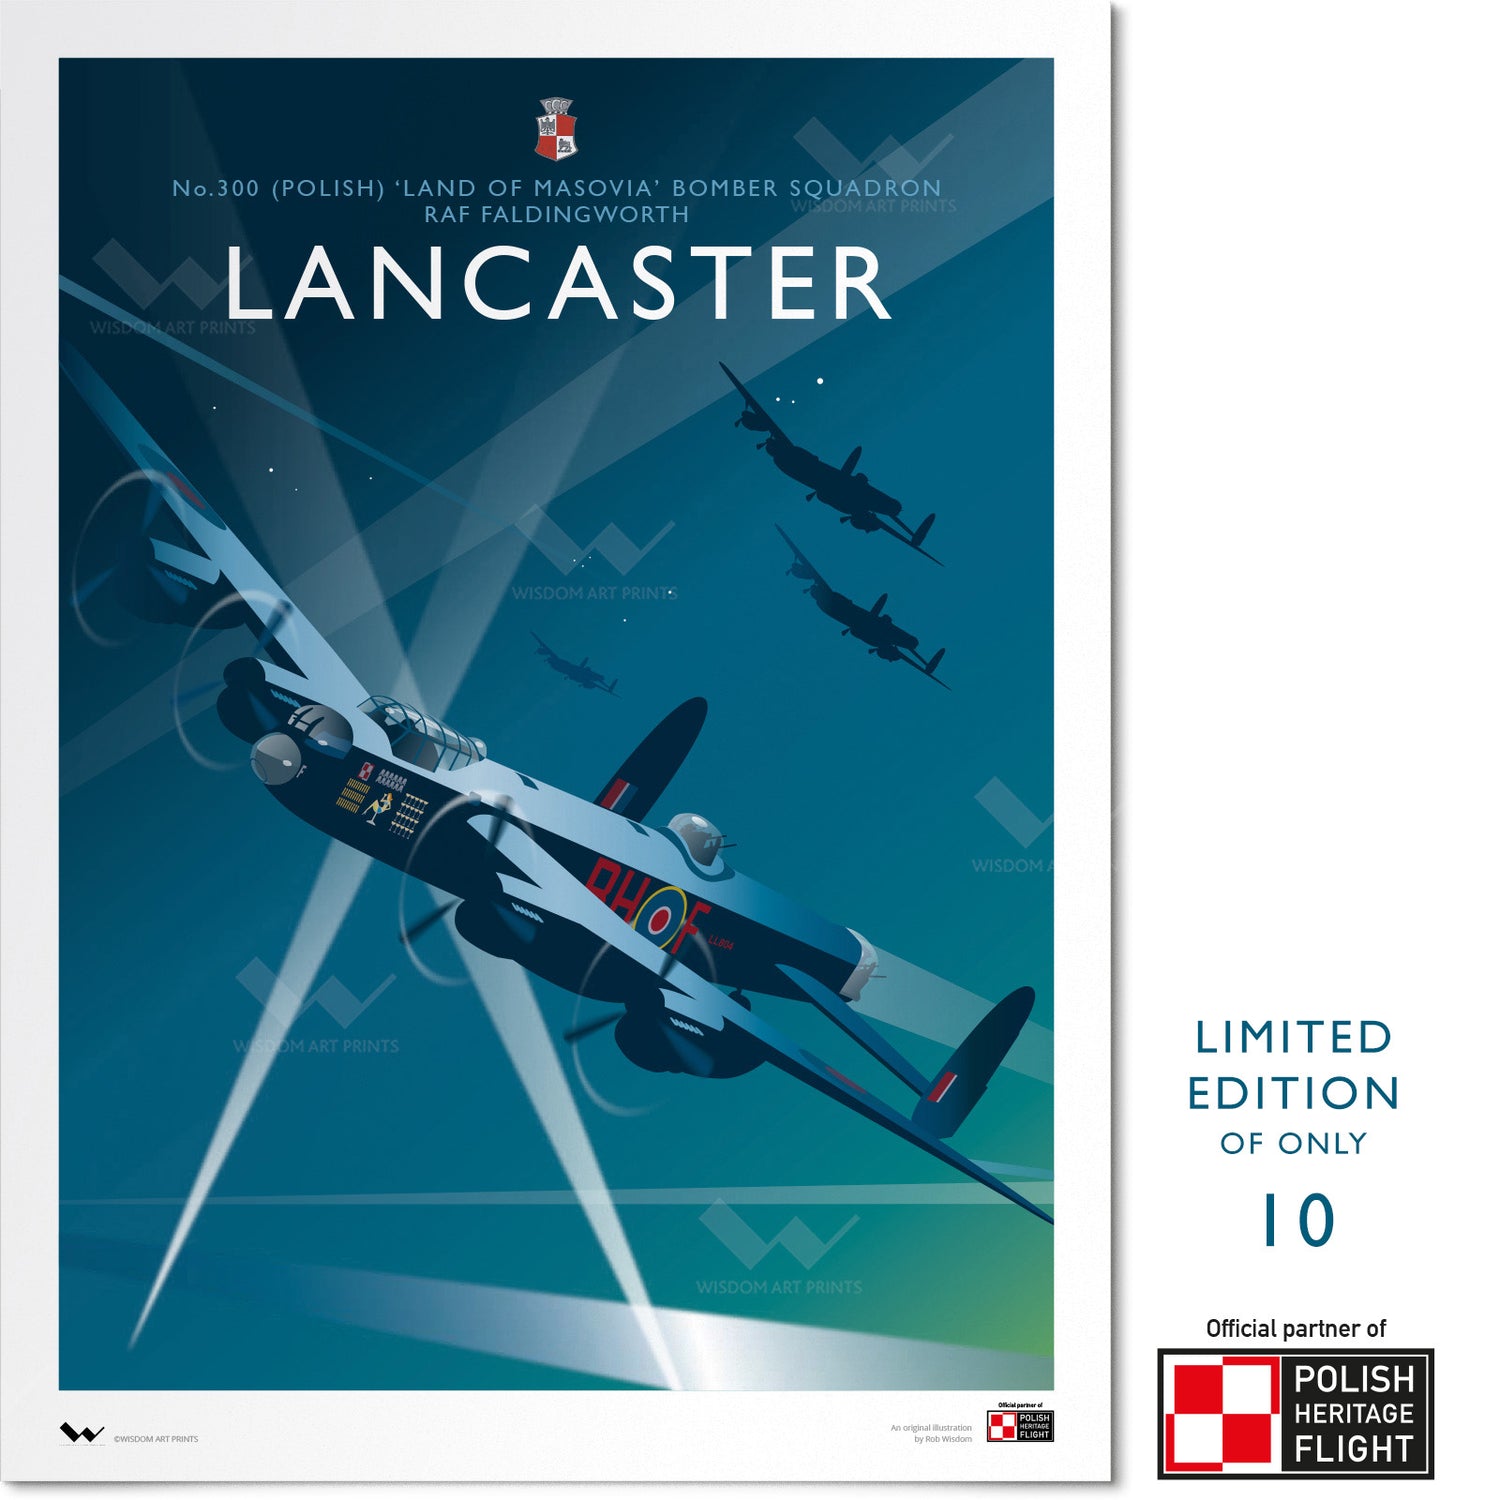 Limited edition art print depicting a Lancaster Bomber in the colours of No. 300 (Polish) Squadron RAF